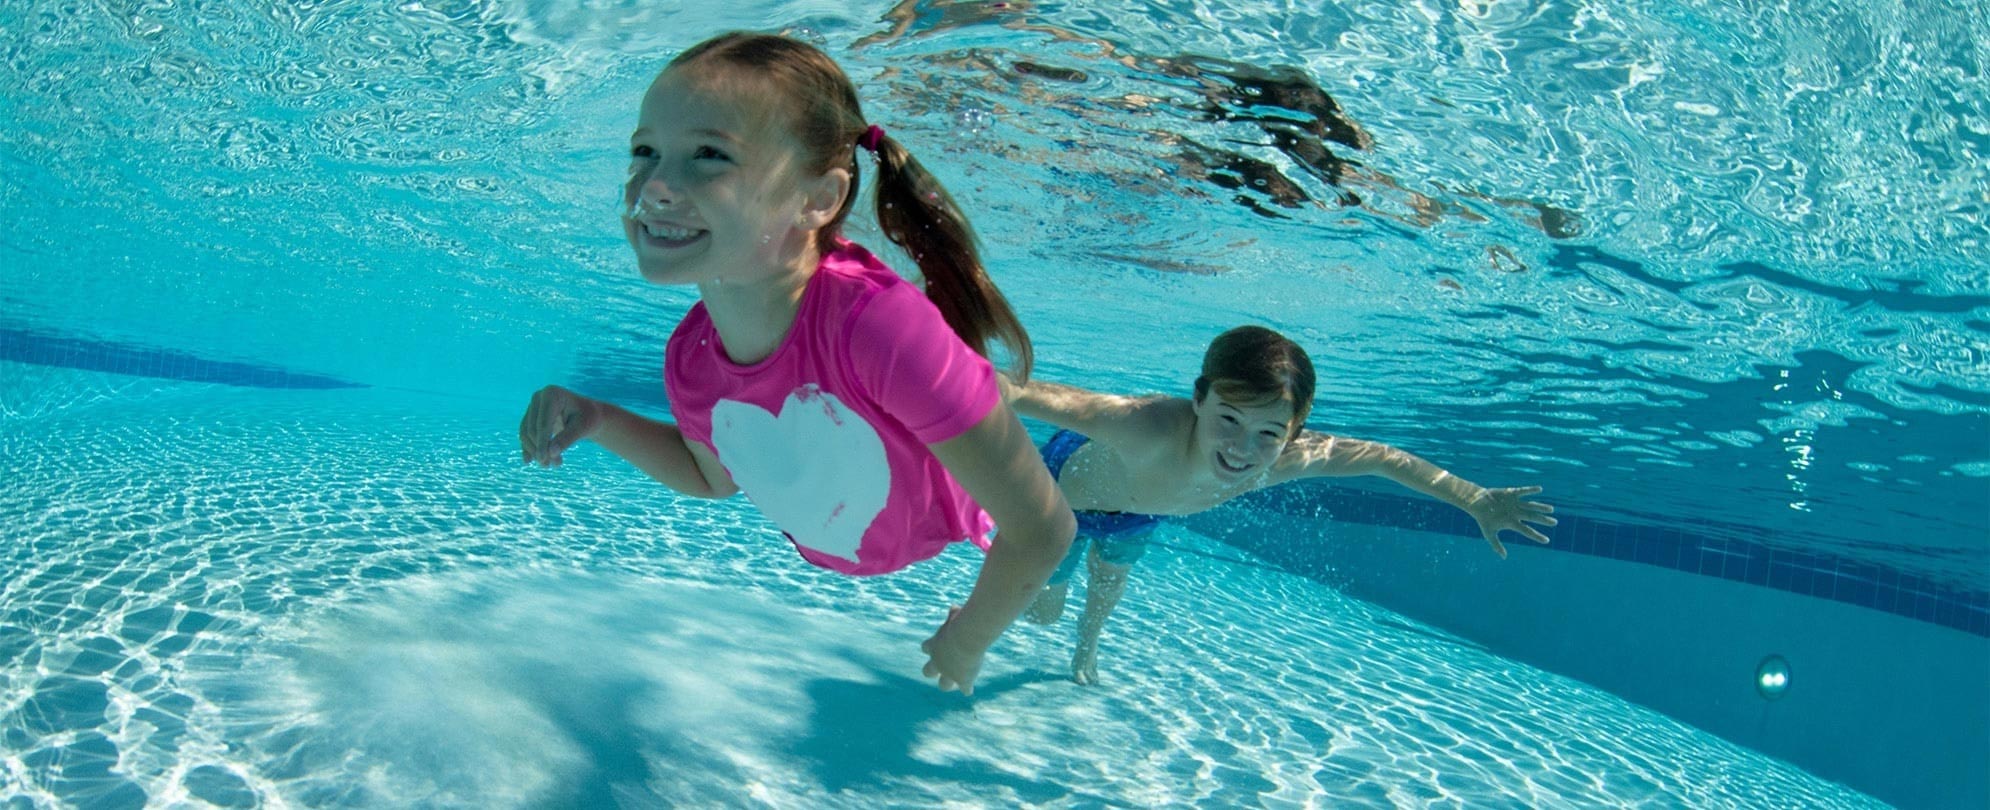 A smiling young girl and boy swim underwater in a pool while enjoying vacation.